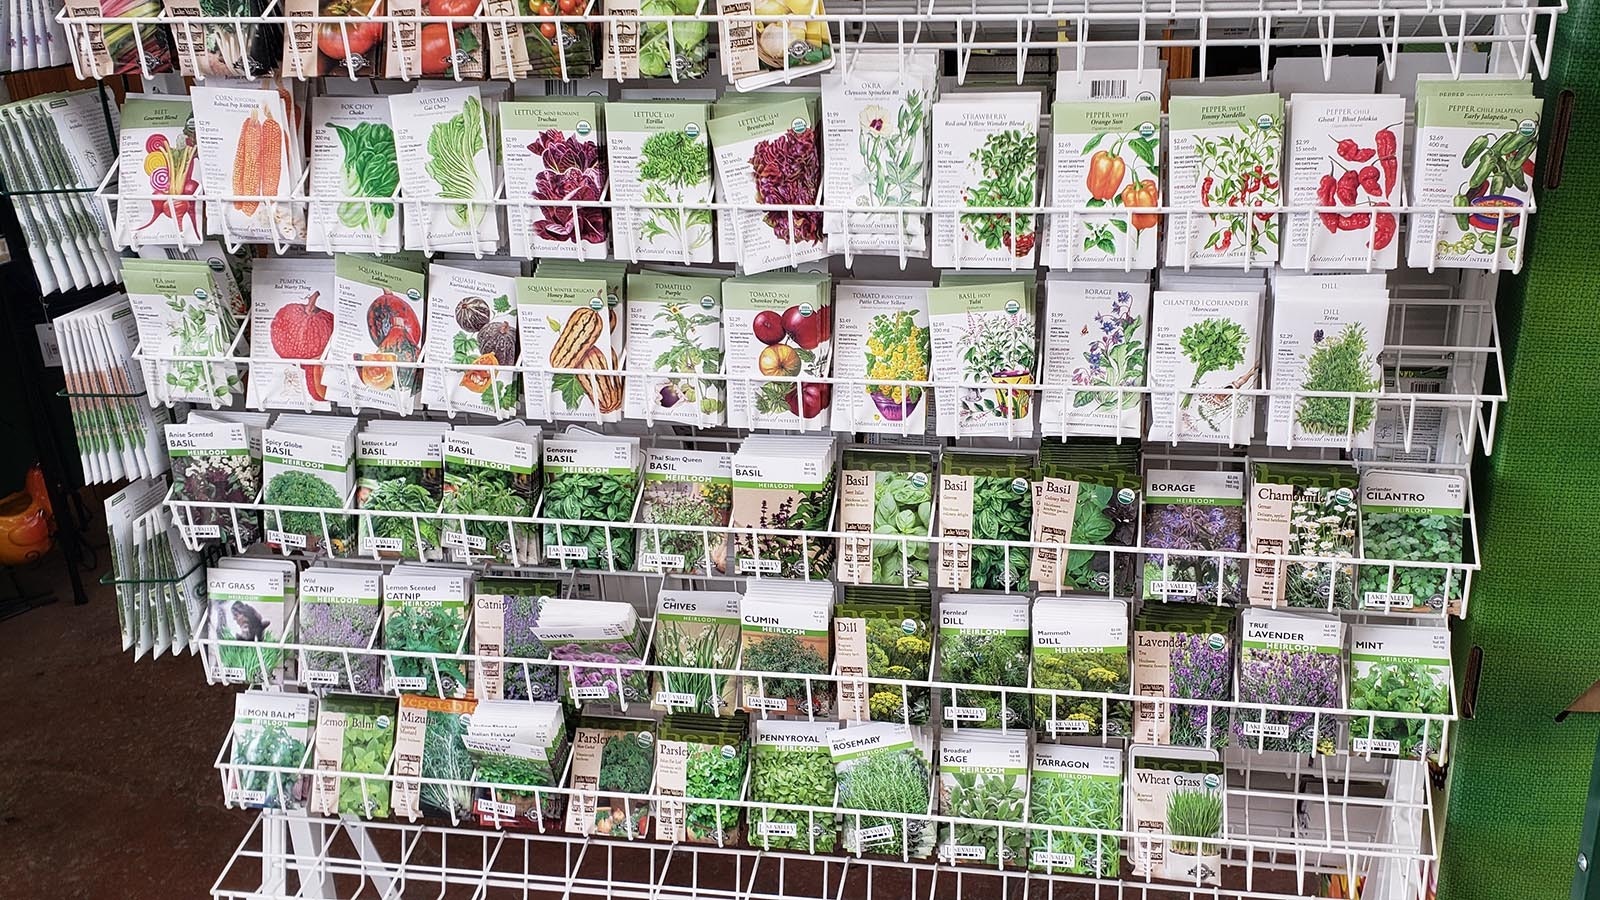 Not enough plants for you at Landon's Greenhouse? Check out it's huge selection of seeds.